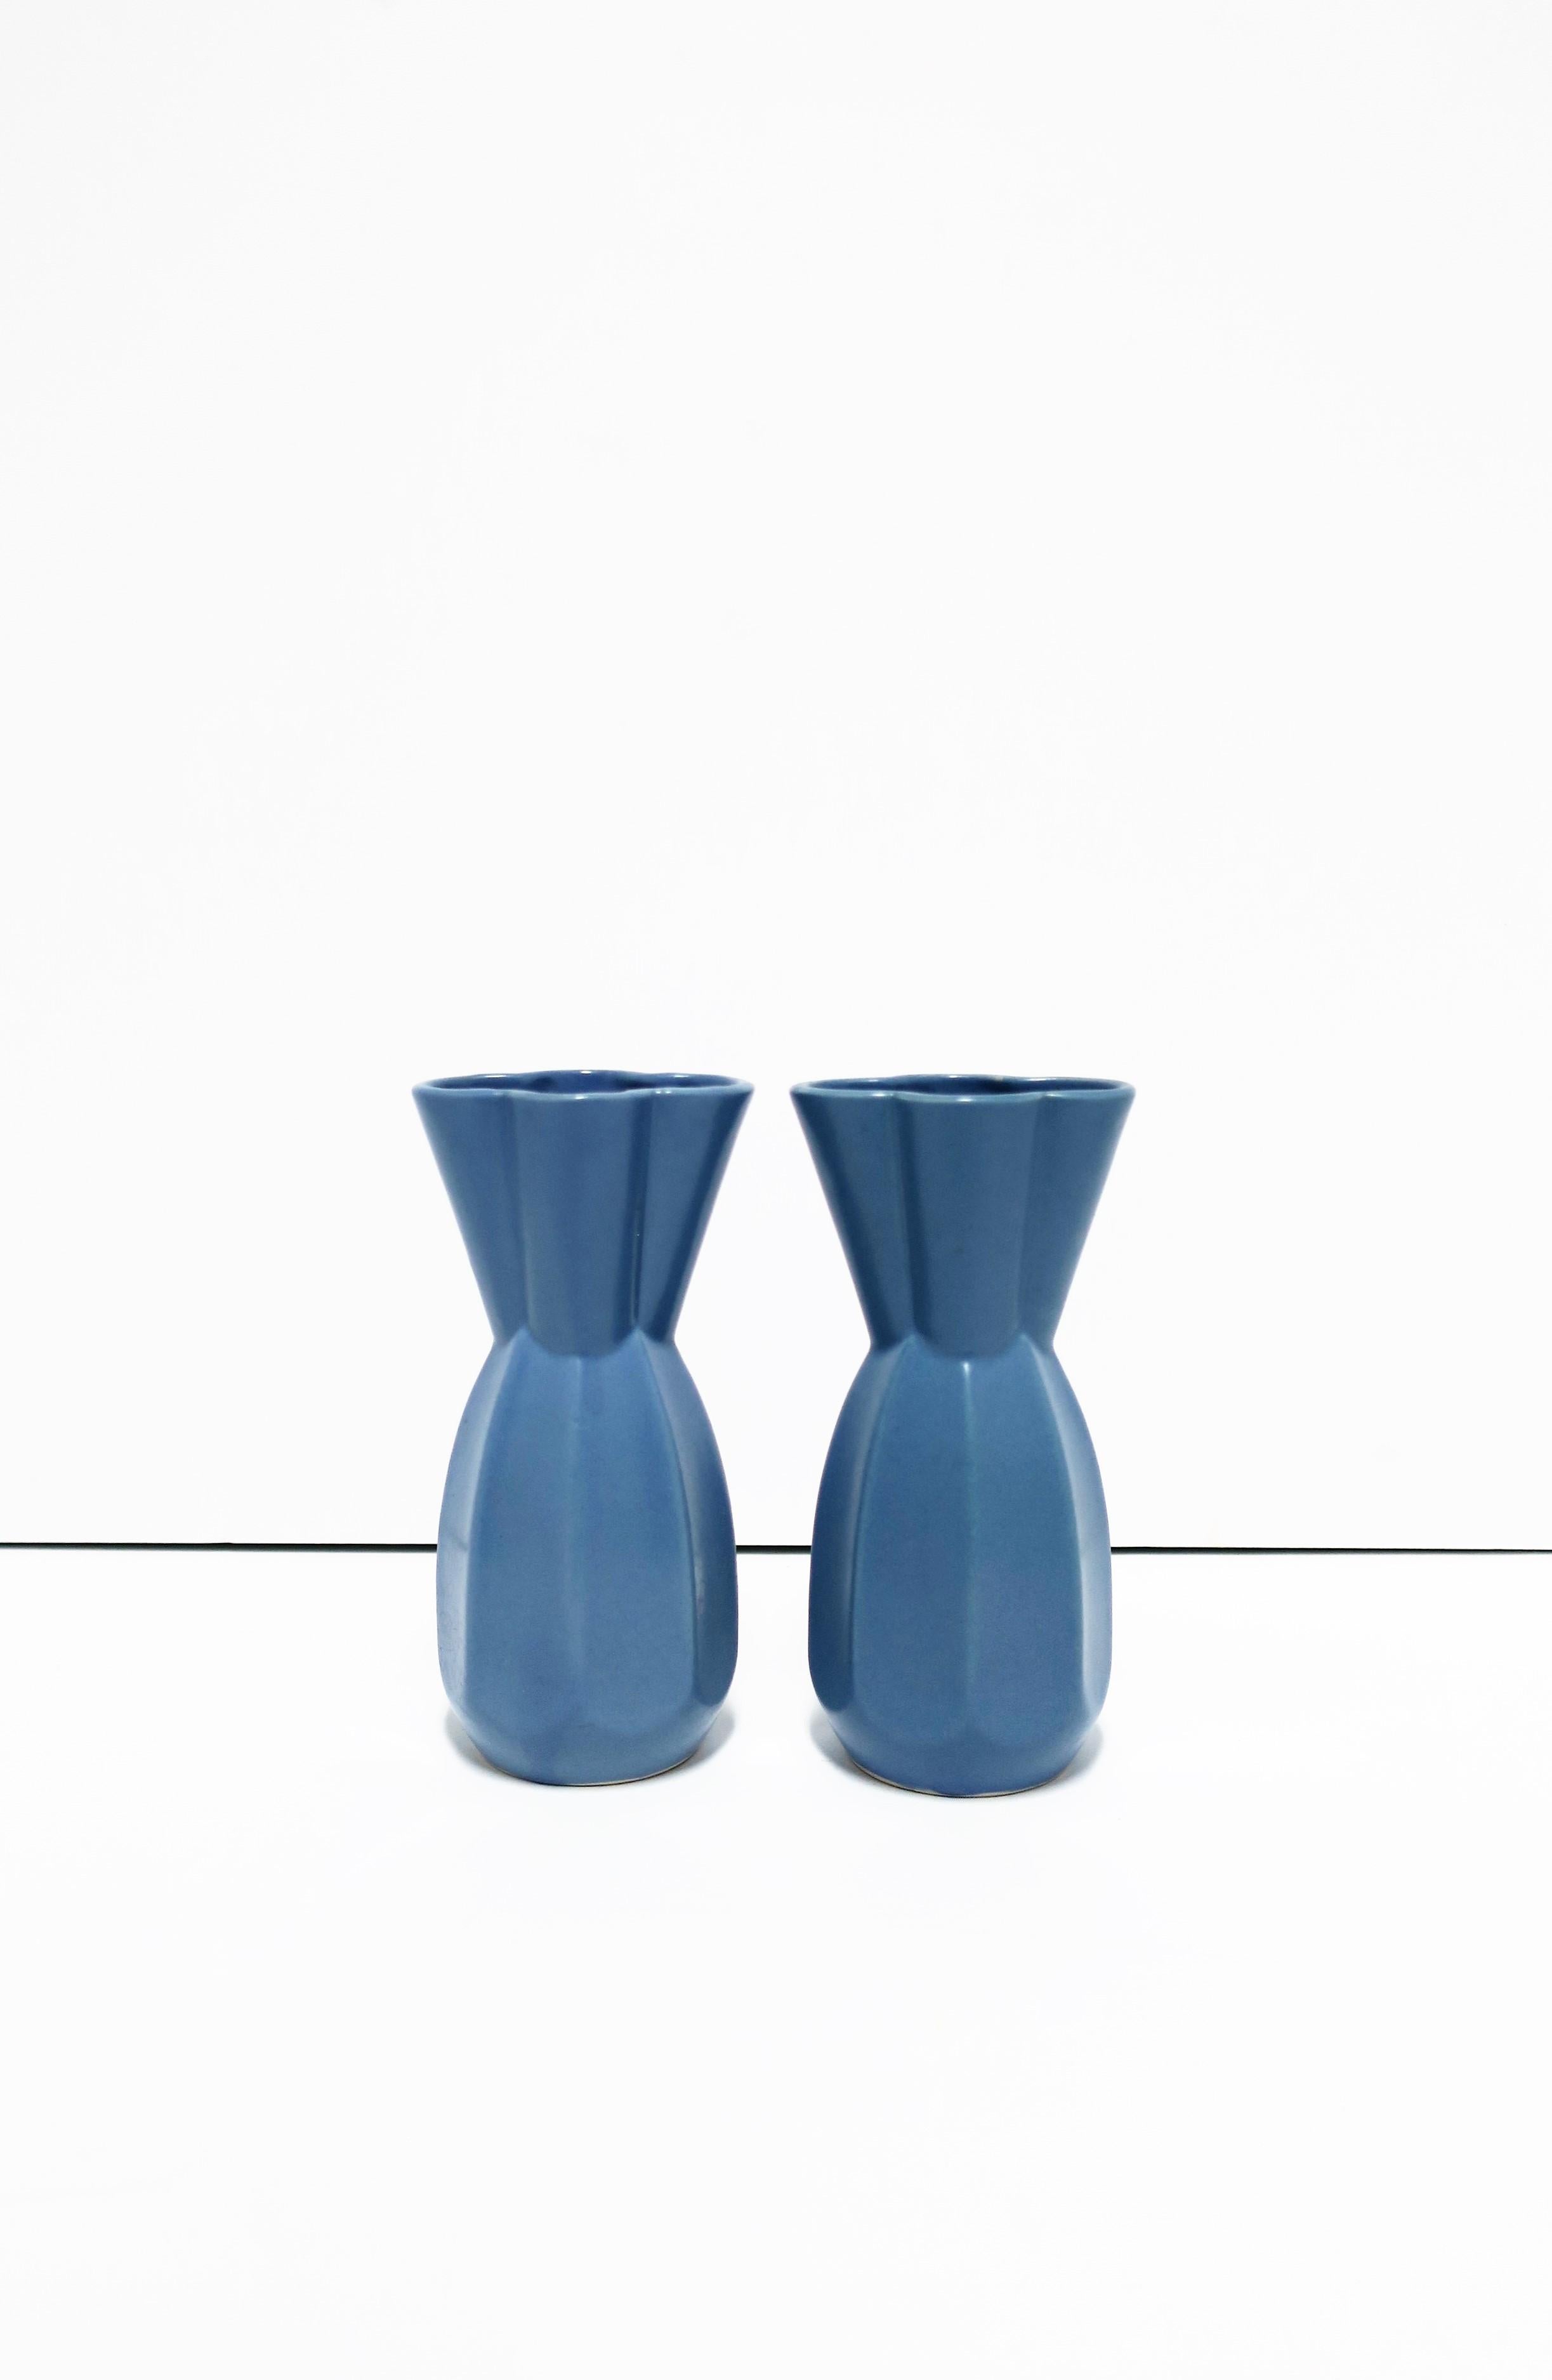 A beautiful pair of Modern periwinkle blue Japanese vases with octagonal base, pinched waist, and clover like design at neck/top. Marked underneath/bottom as show in image #15, circa early 20th century Japan, 1921-1941. Dimensions: 3.75